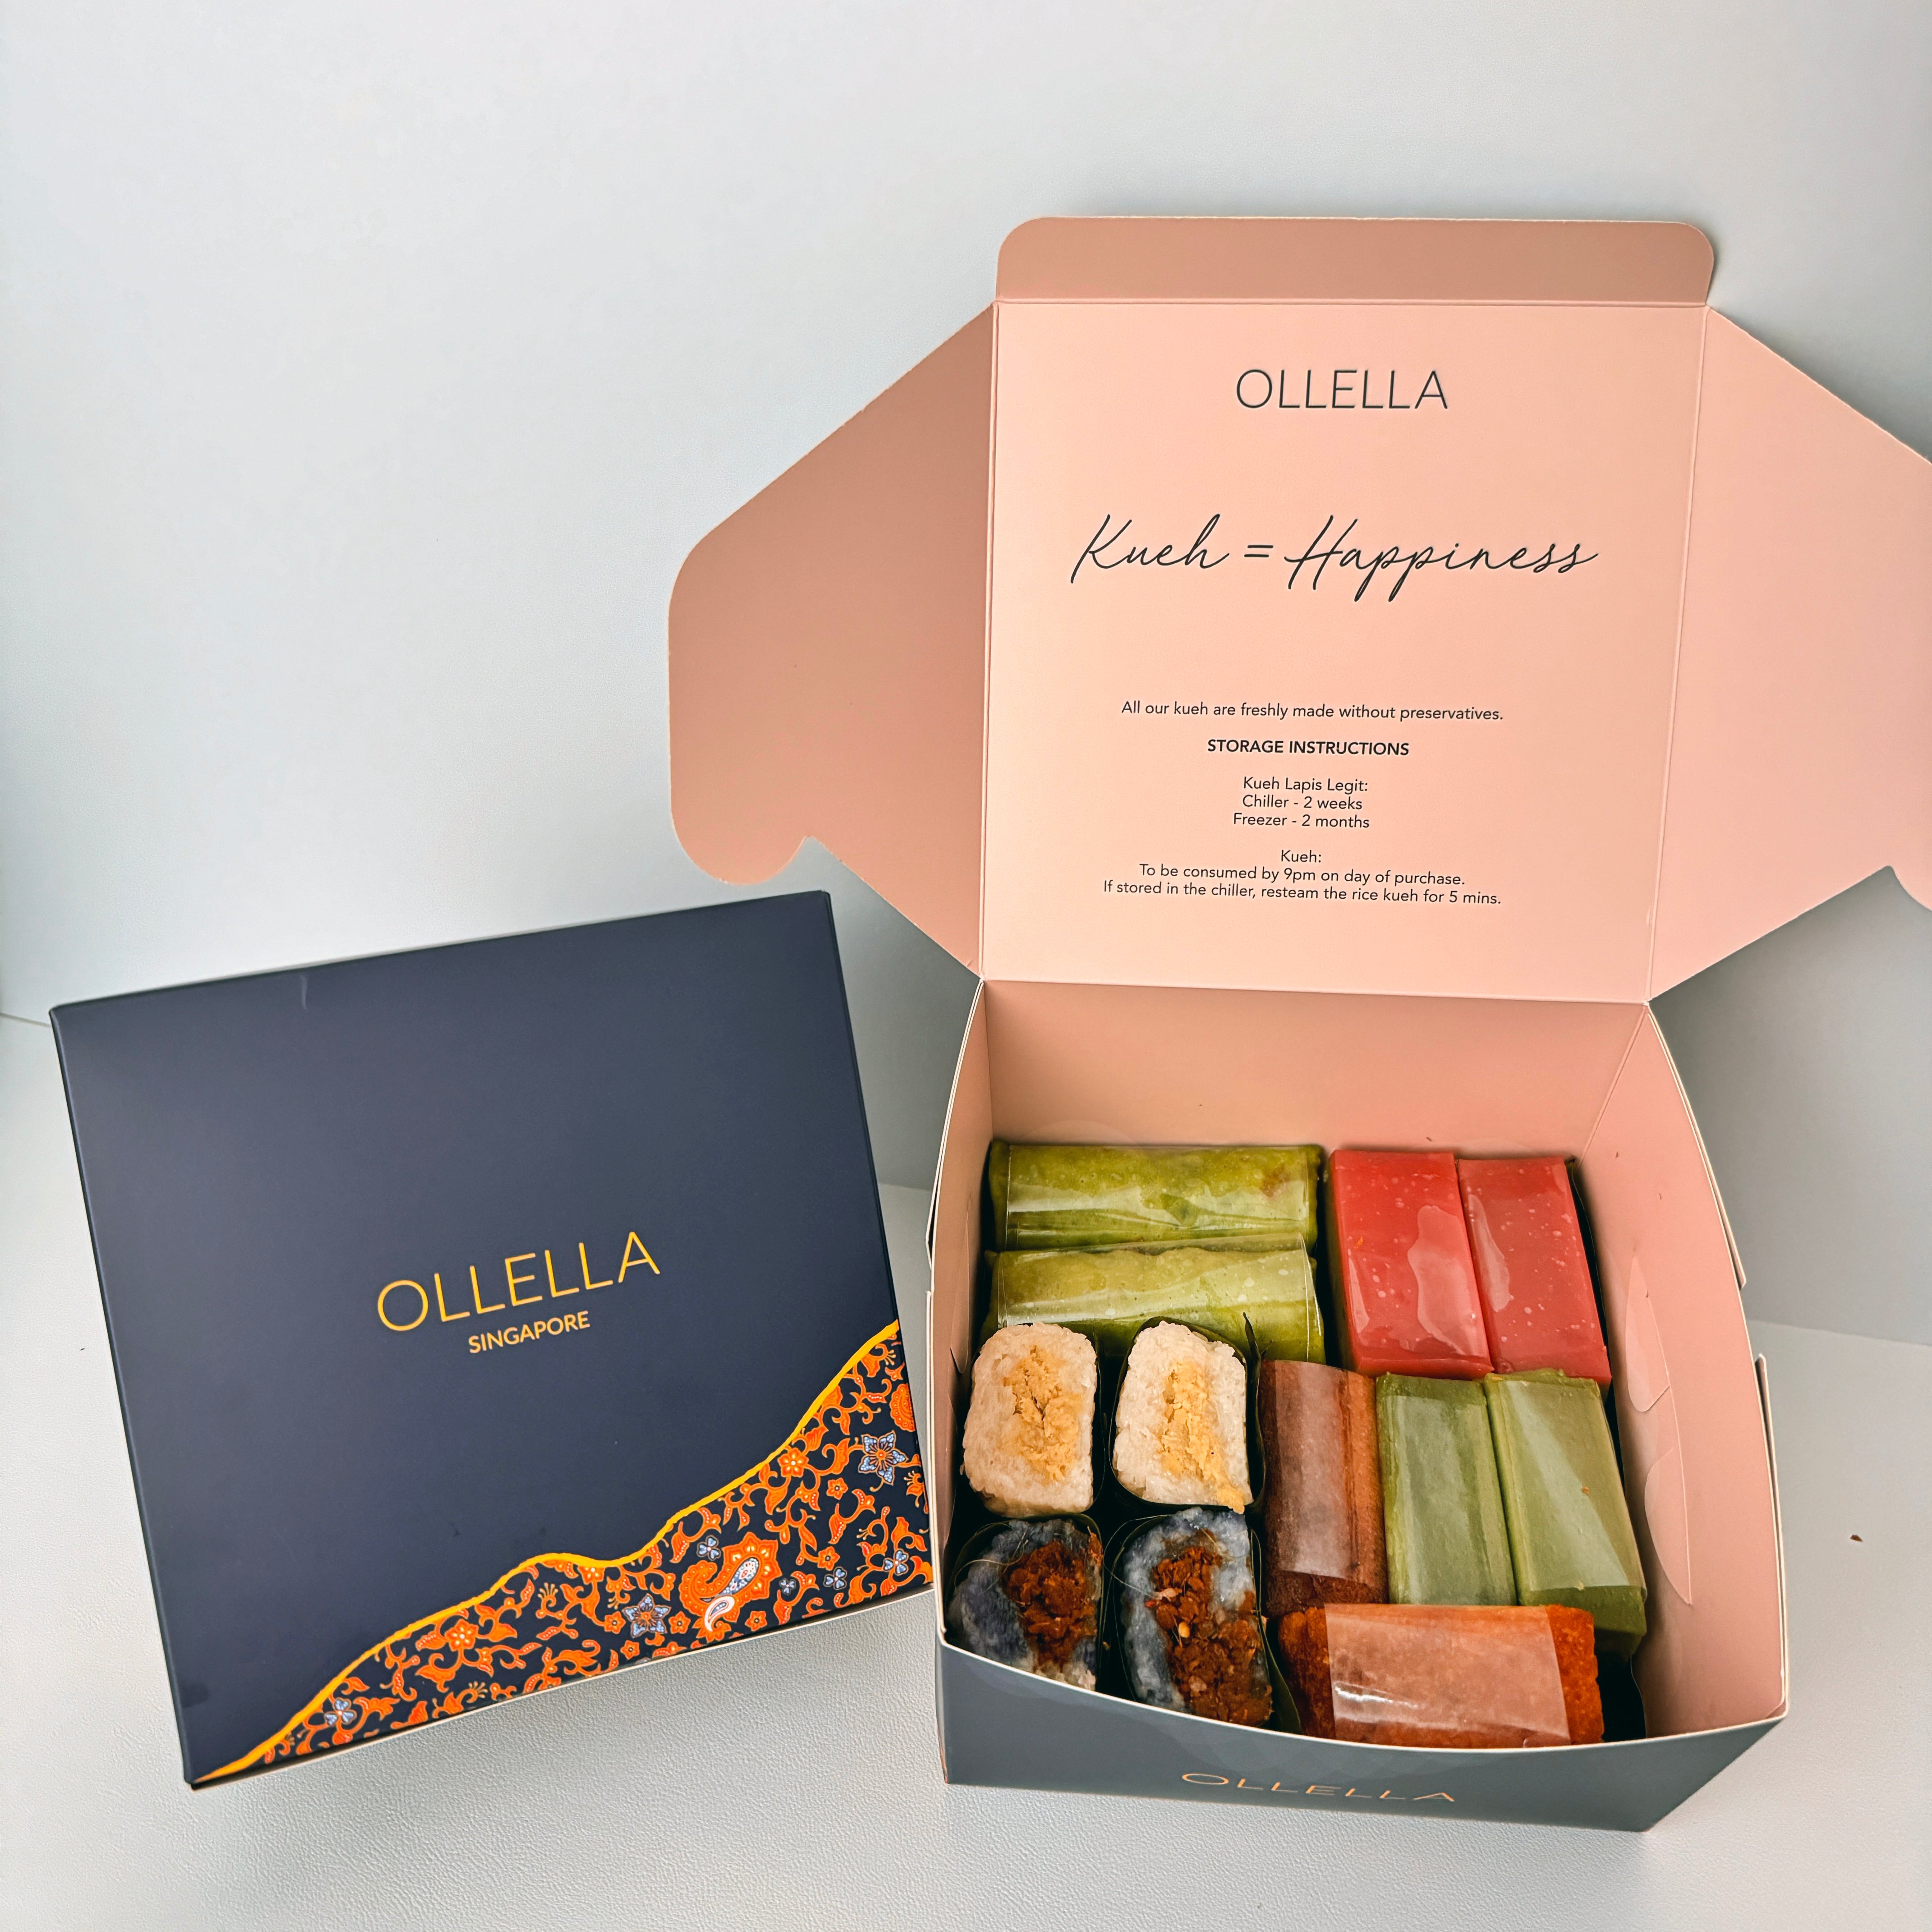 OLLELLA Kueh + Floral Bouquet in MaMa Jute Bag (10, 11, 12 May only)